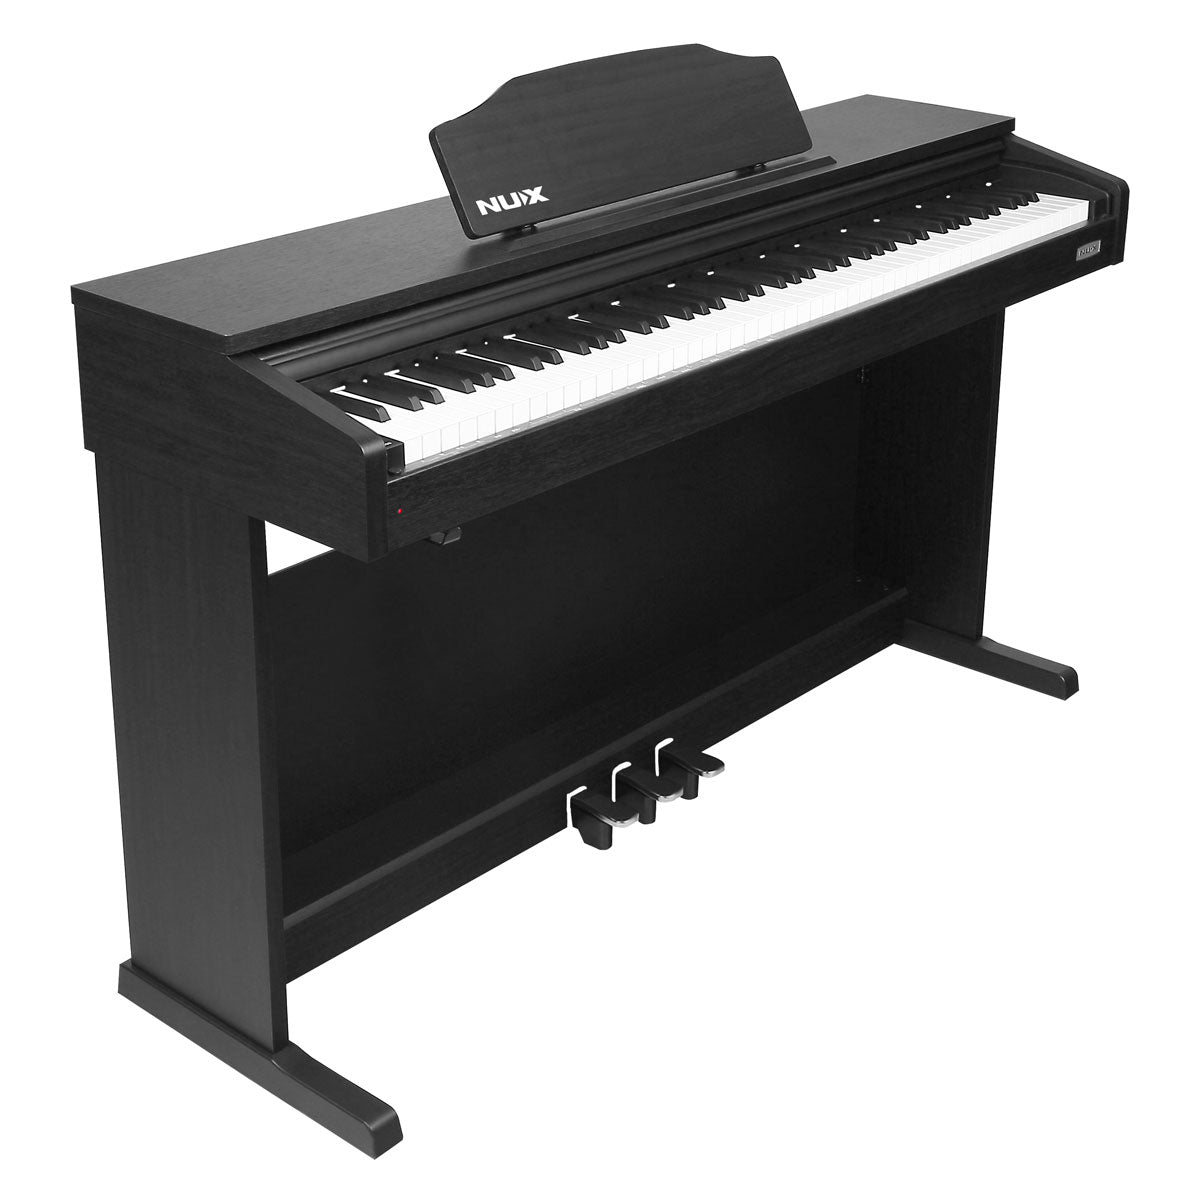 Nux WK-400 88 Key Digital Piano with Hammer Action Keyboard